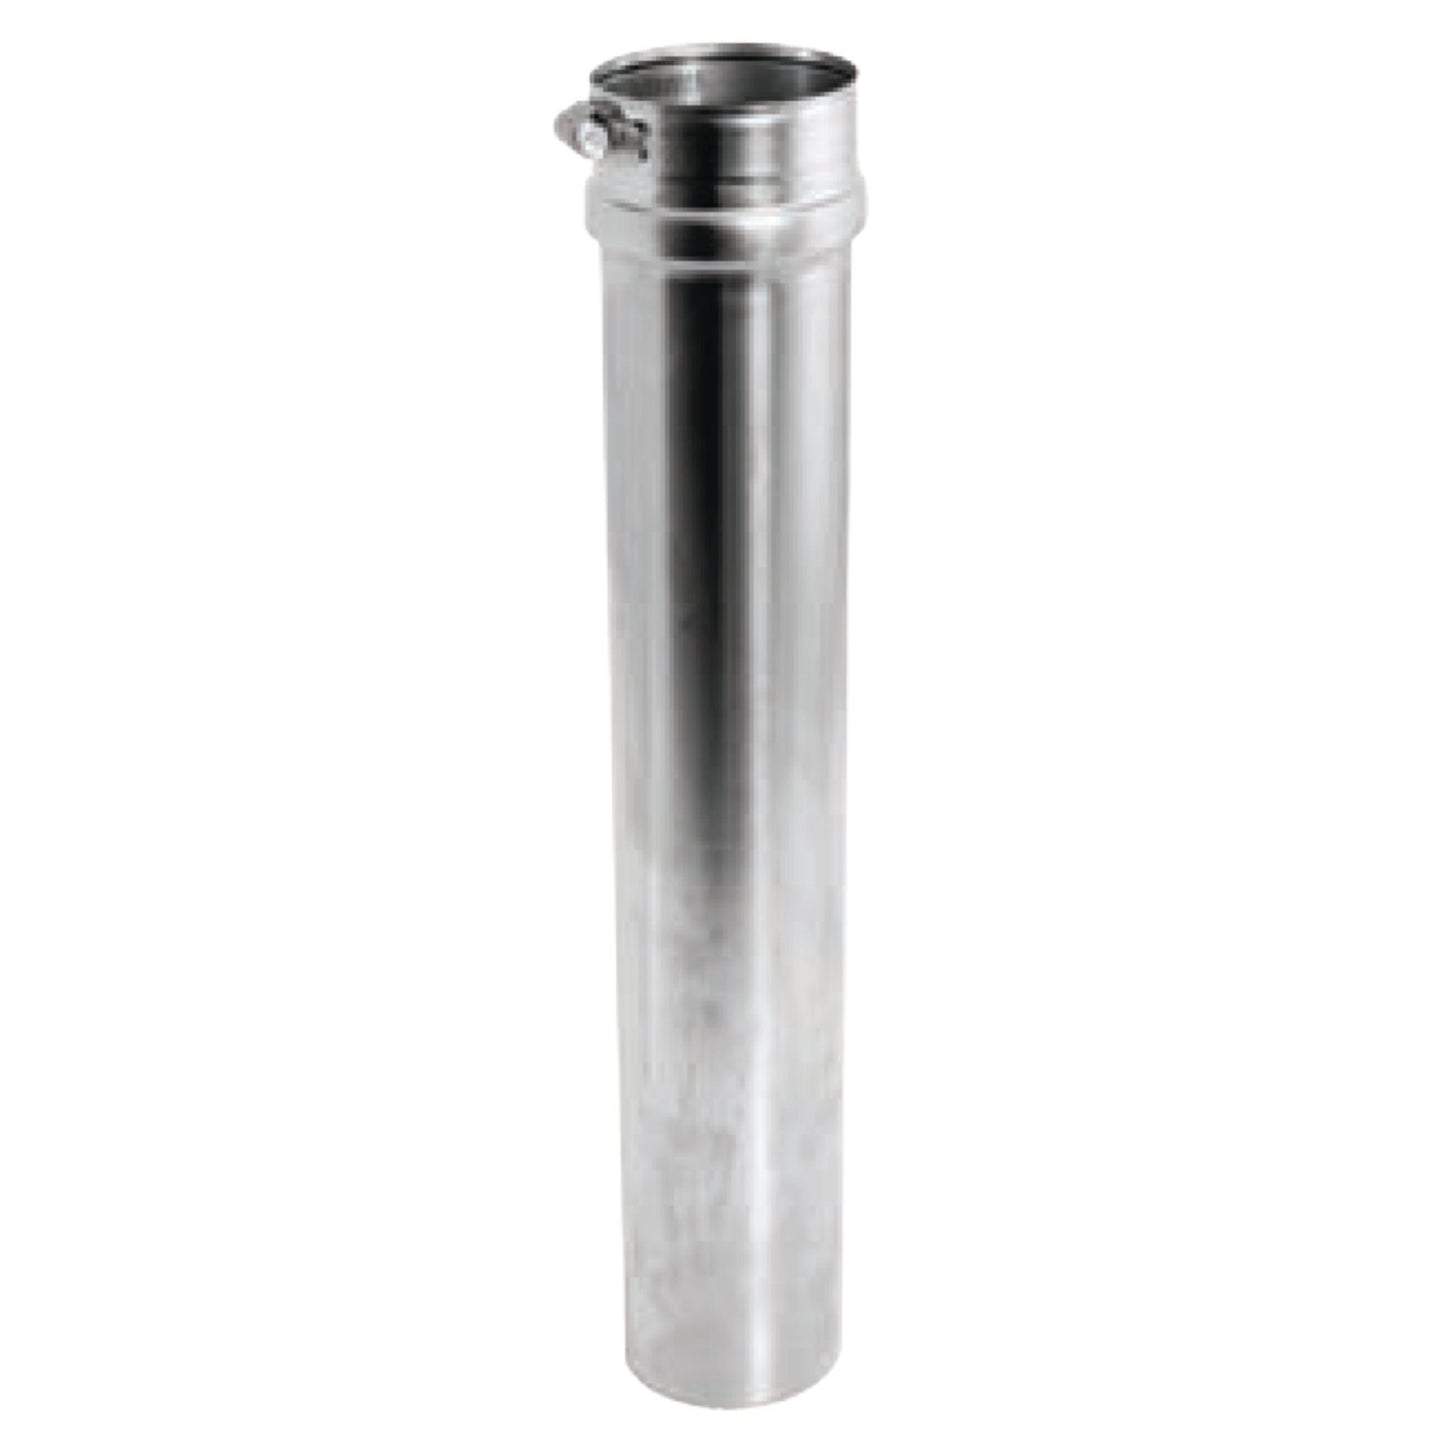 DuraVent FasNSeal 9" x 18" 316L Stainless Steel Adjustable Vent Length